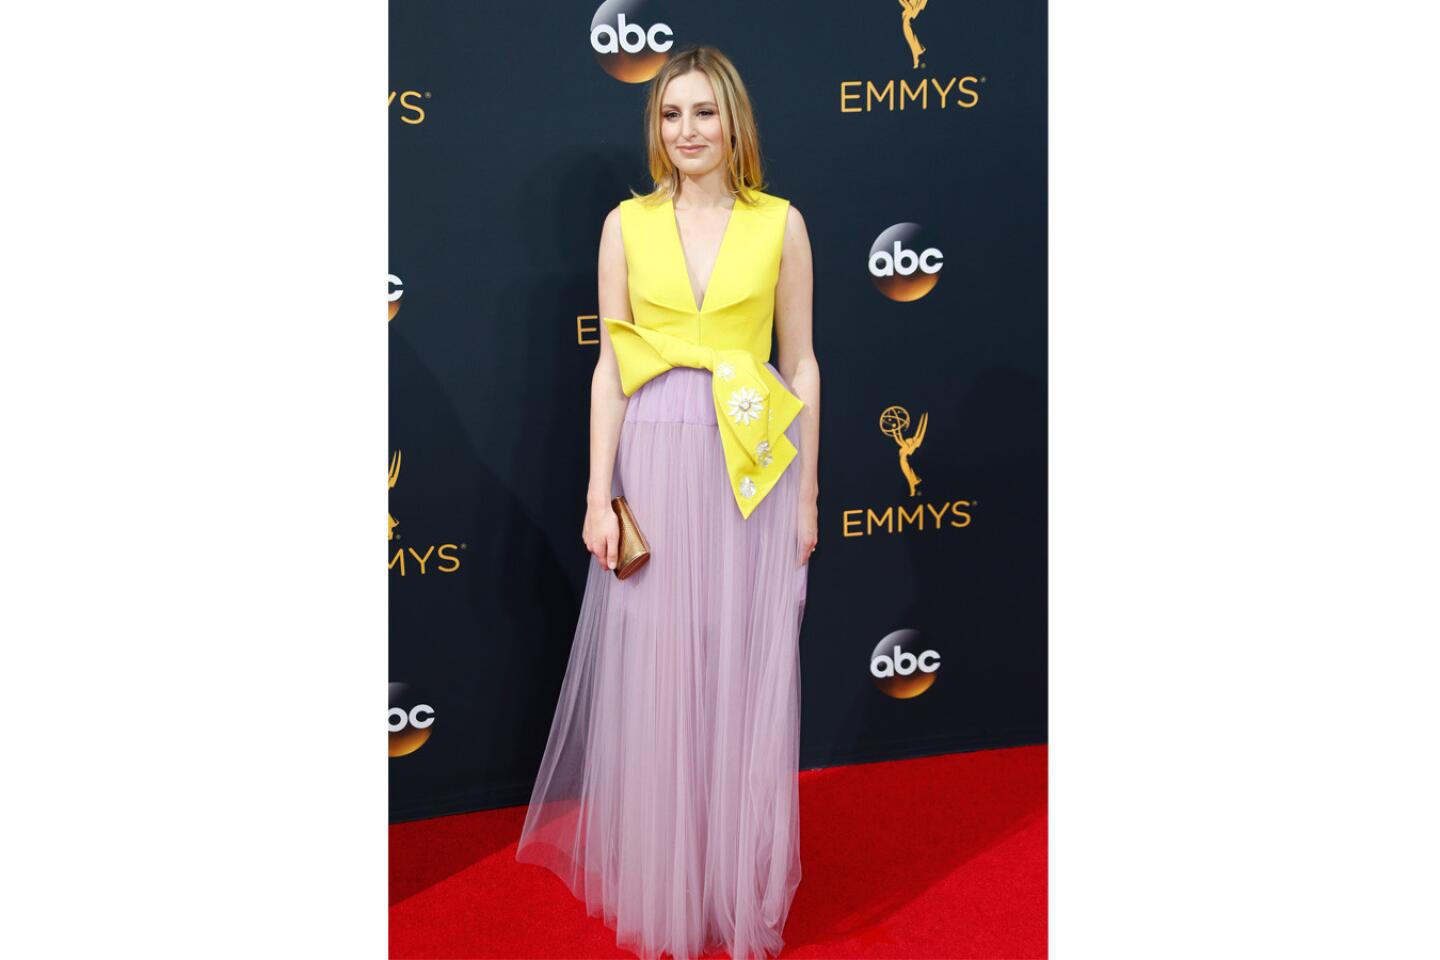 We did not love Laura Carmichael's look for the 2016 Emmys.